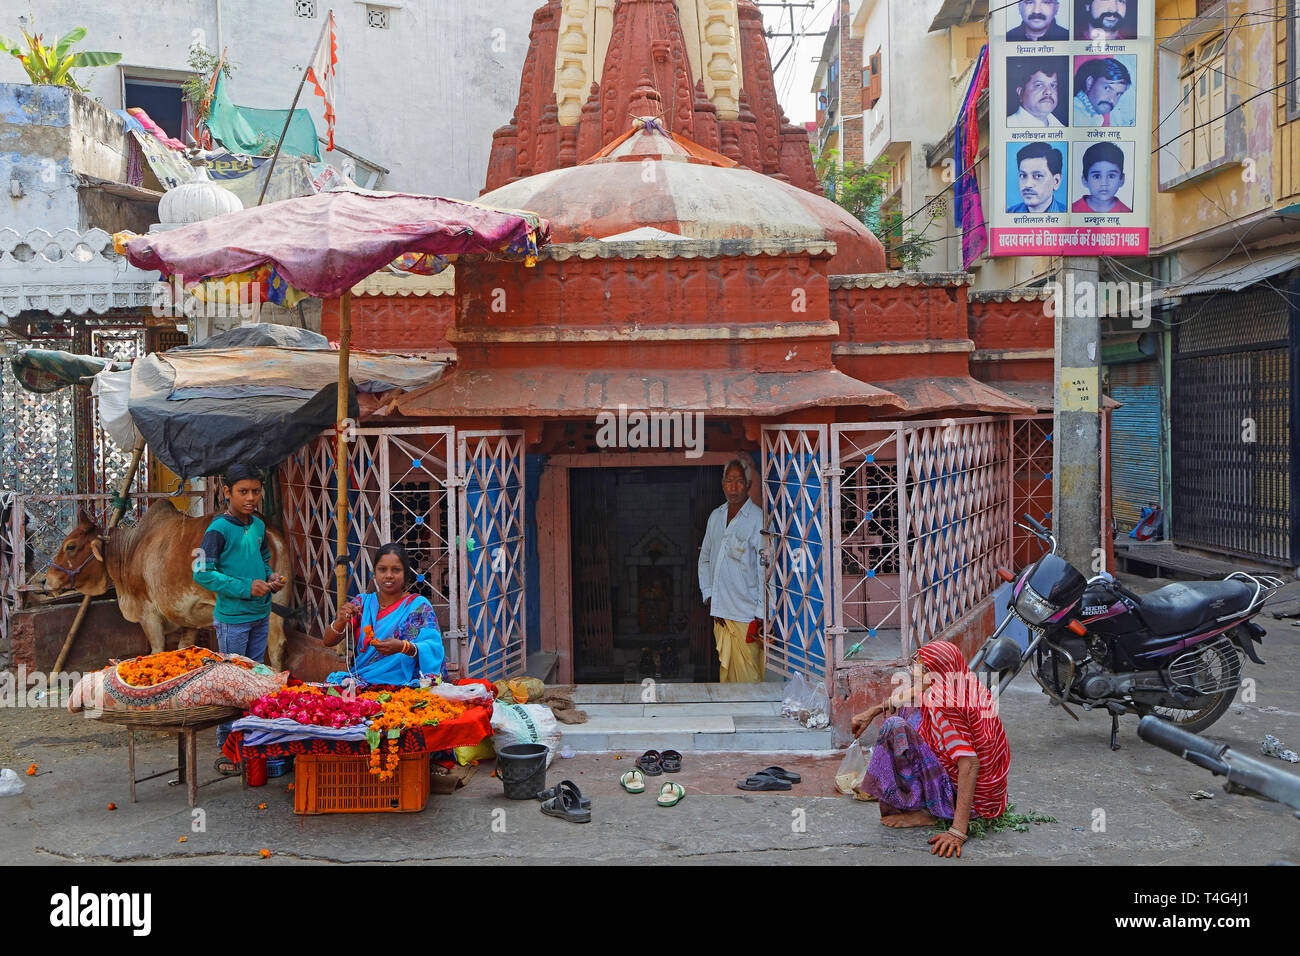 UDAIPUR, INDIA, November 5, 2017 : A family starts on a motorbike in front of a small store of the traditional market in Udaipur, Rajasthan. Stock Photo